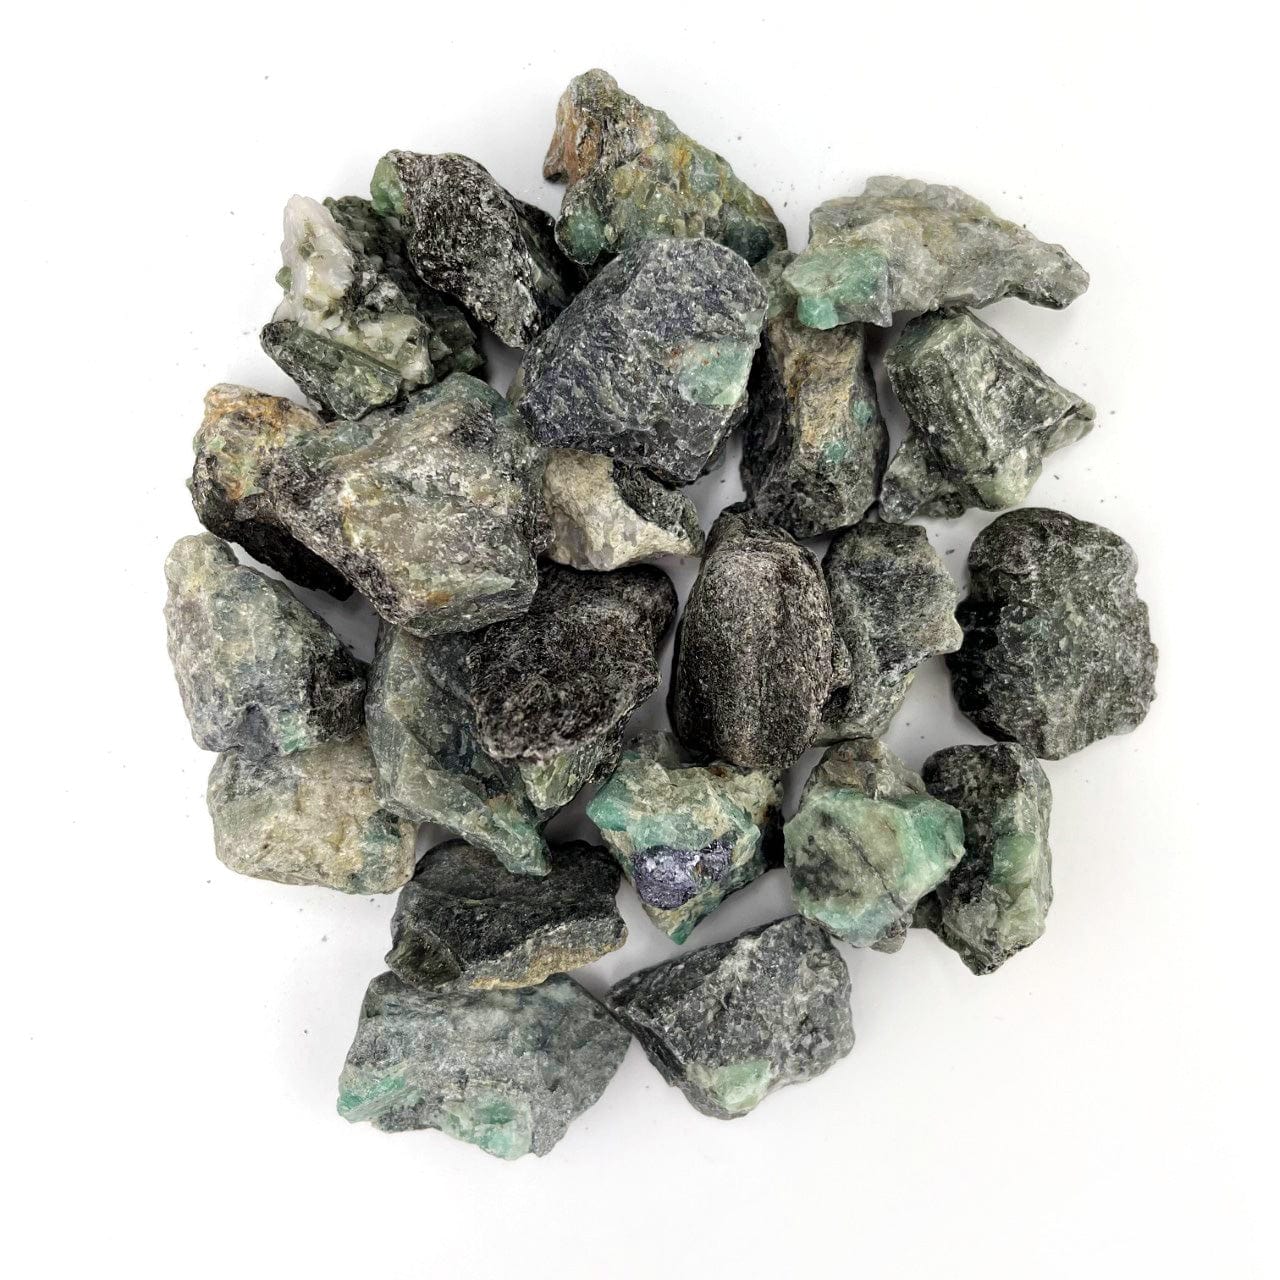 Emerald Natural Stones in a pile